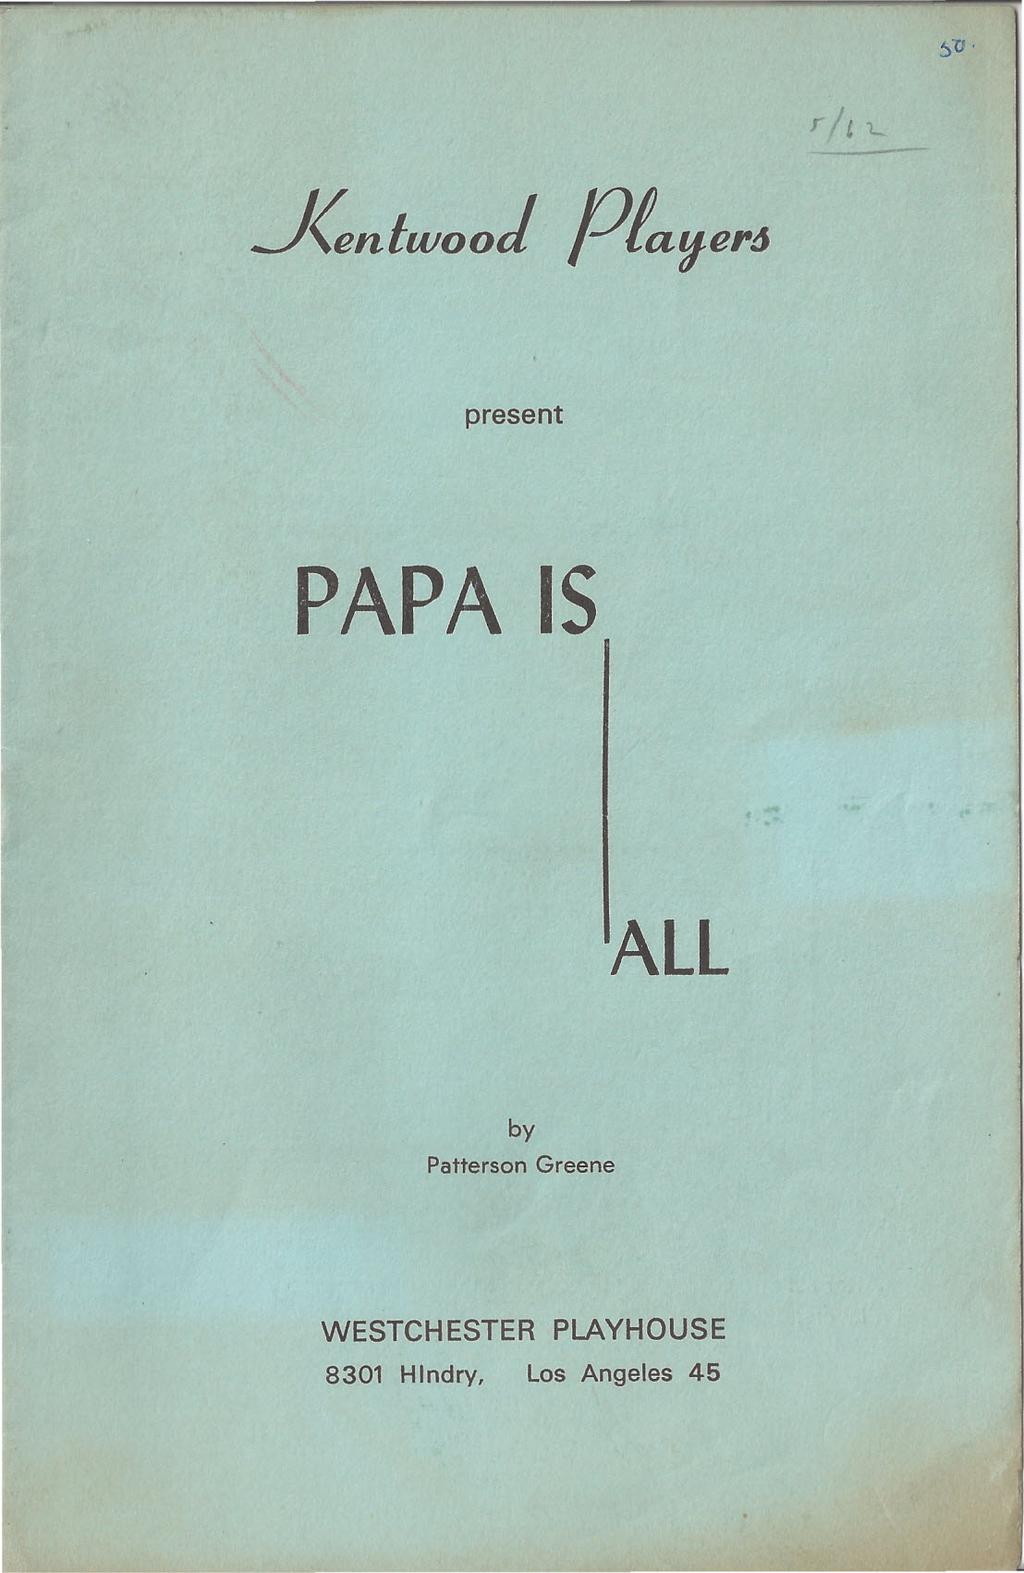 present PAPA IS All by Patterson Greene